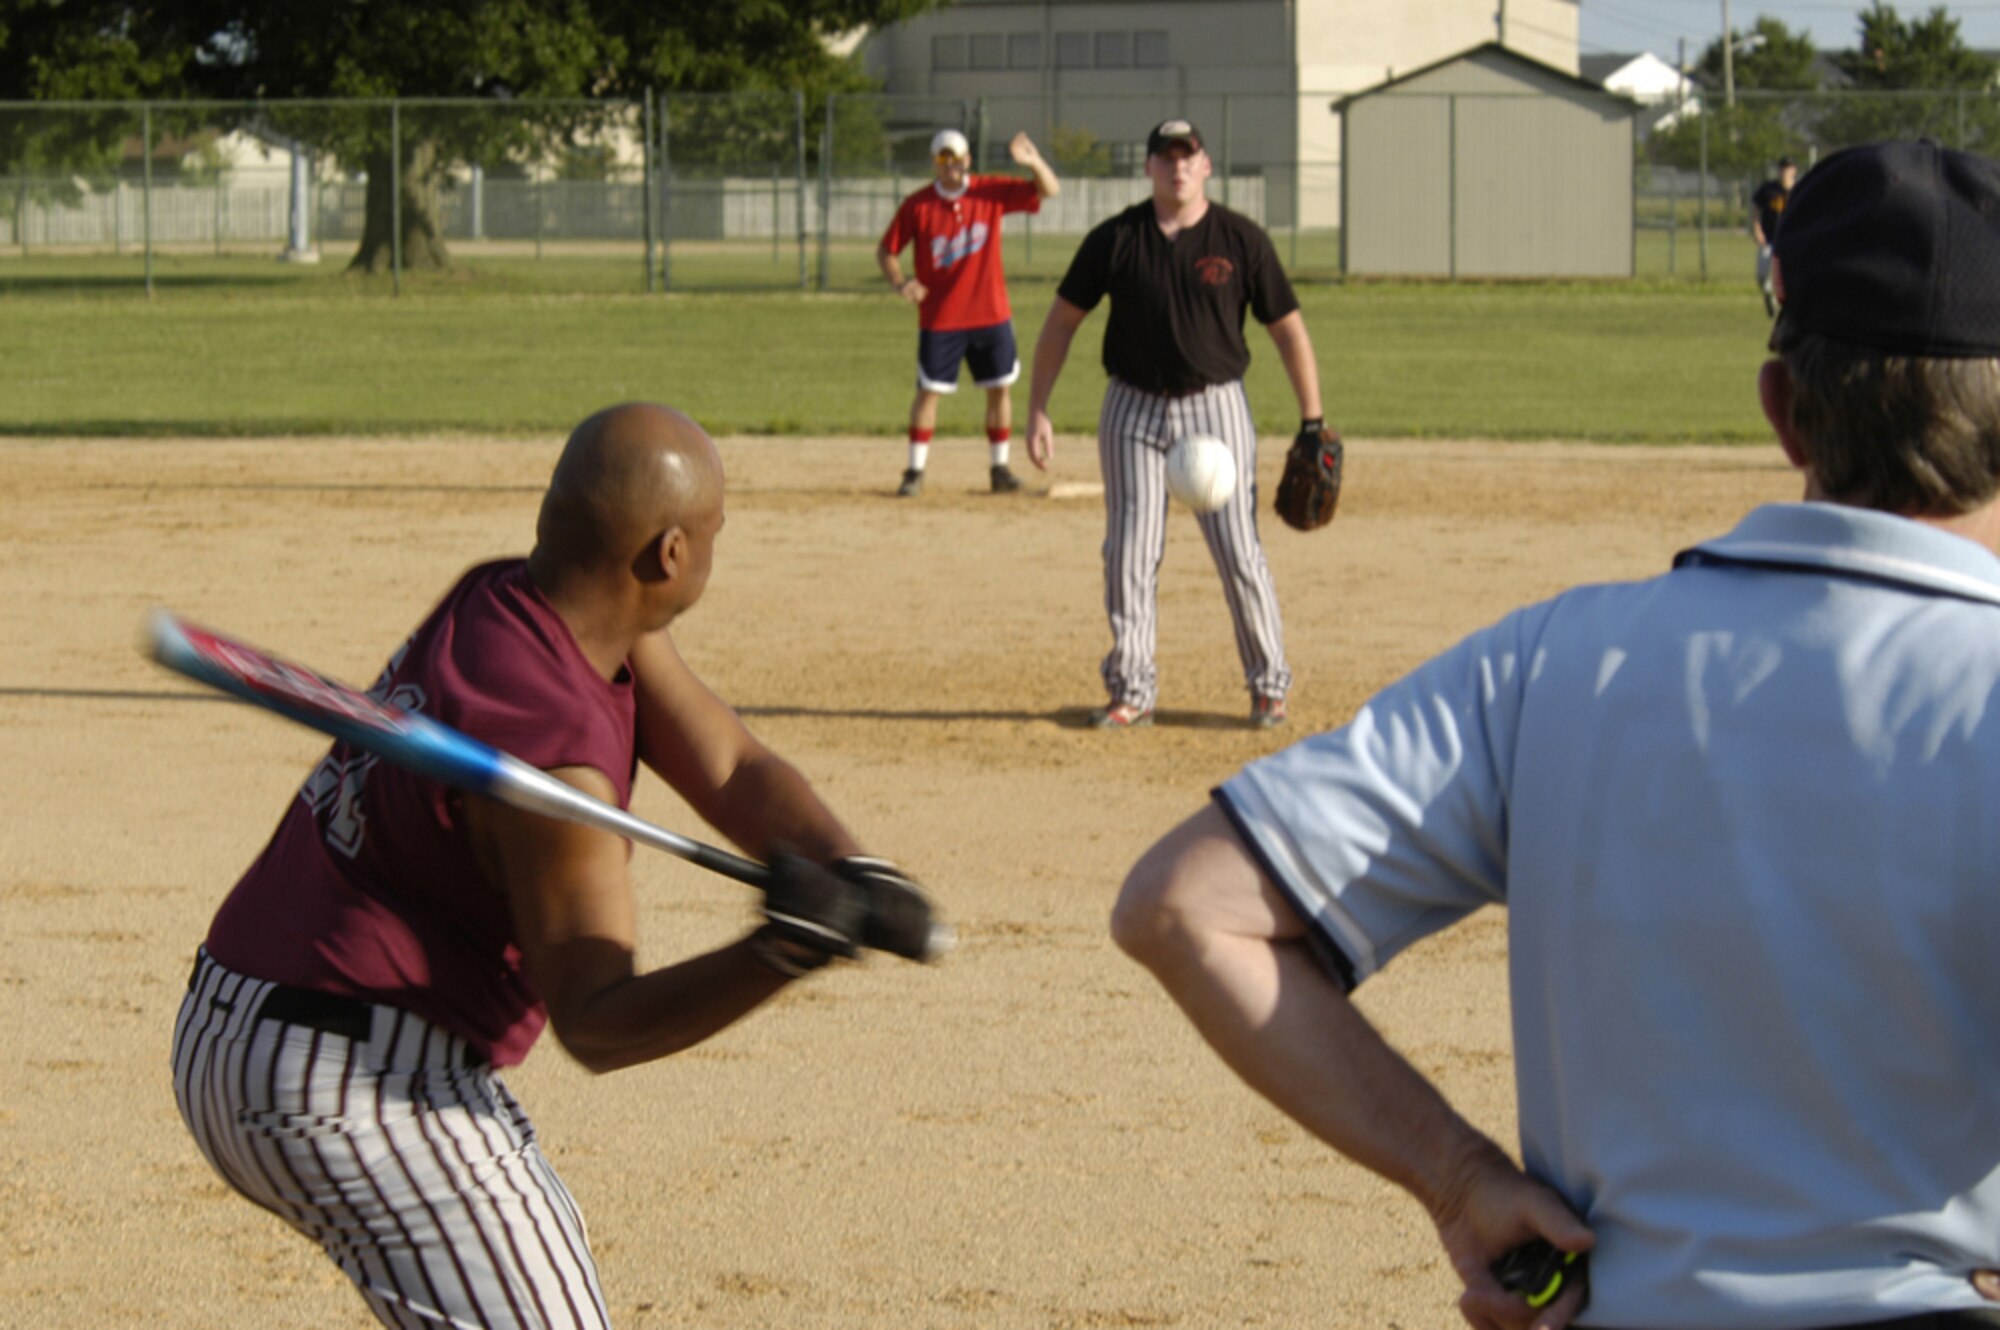 Kelvin Carter, 436th Logistics Readiness Squadron first baseman, swings for a pitch in Monday’s intramural softball game against the 436th Aerial Port Squadron. The Loggies defeated the Porters 24 – 12 over six innings of play. (U.S. Air Force photo/Senior Airman James Bolinger)